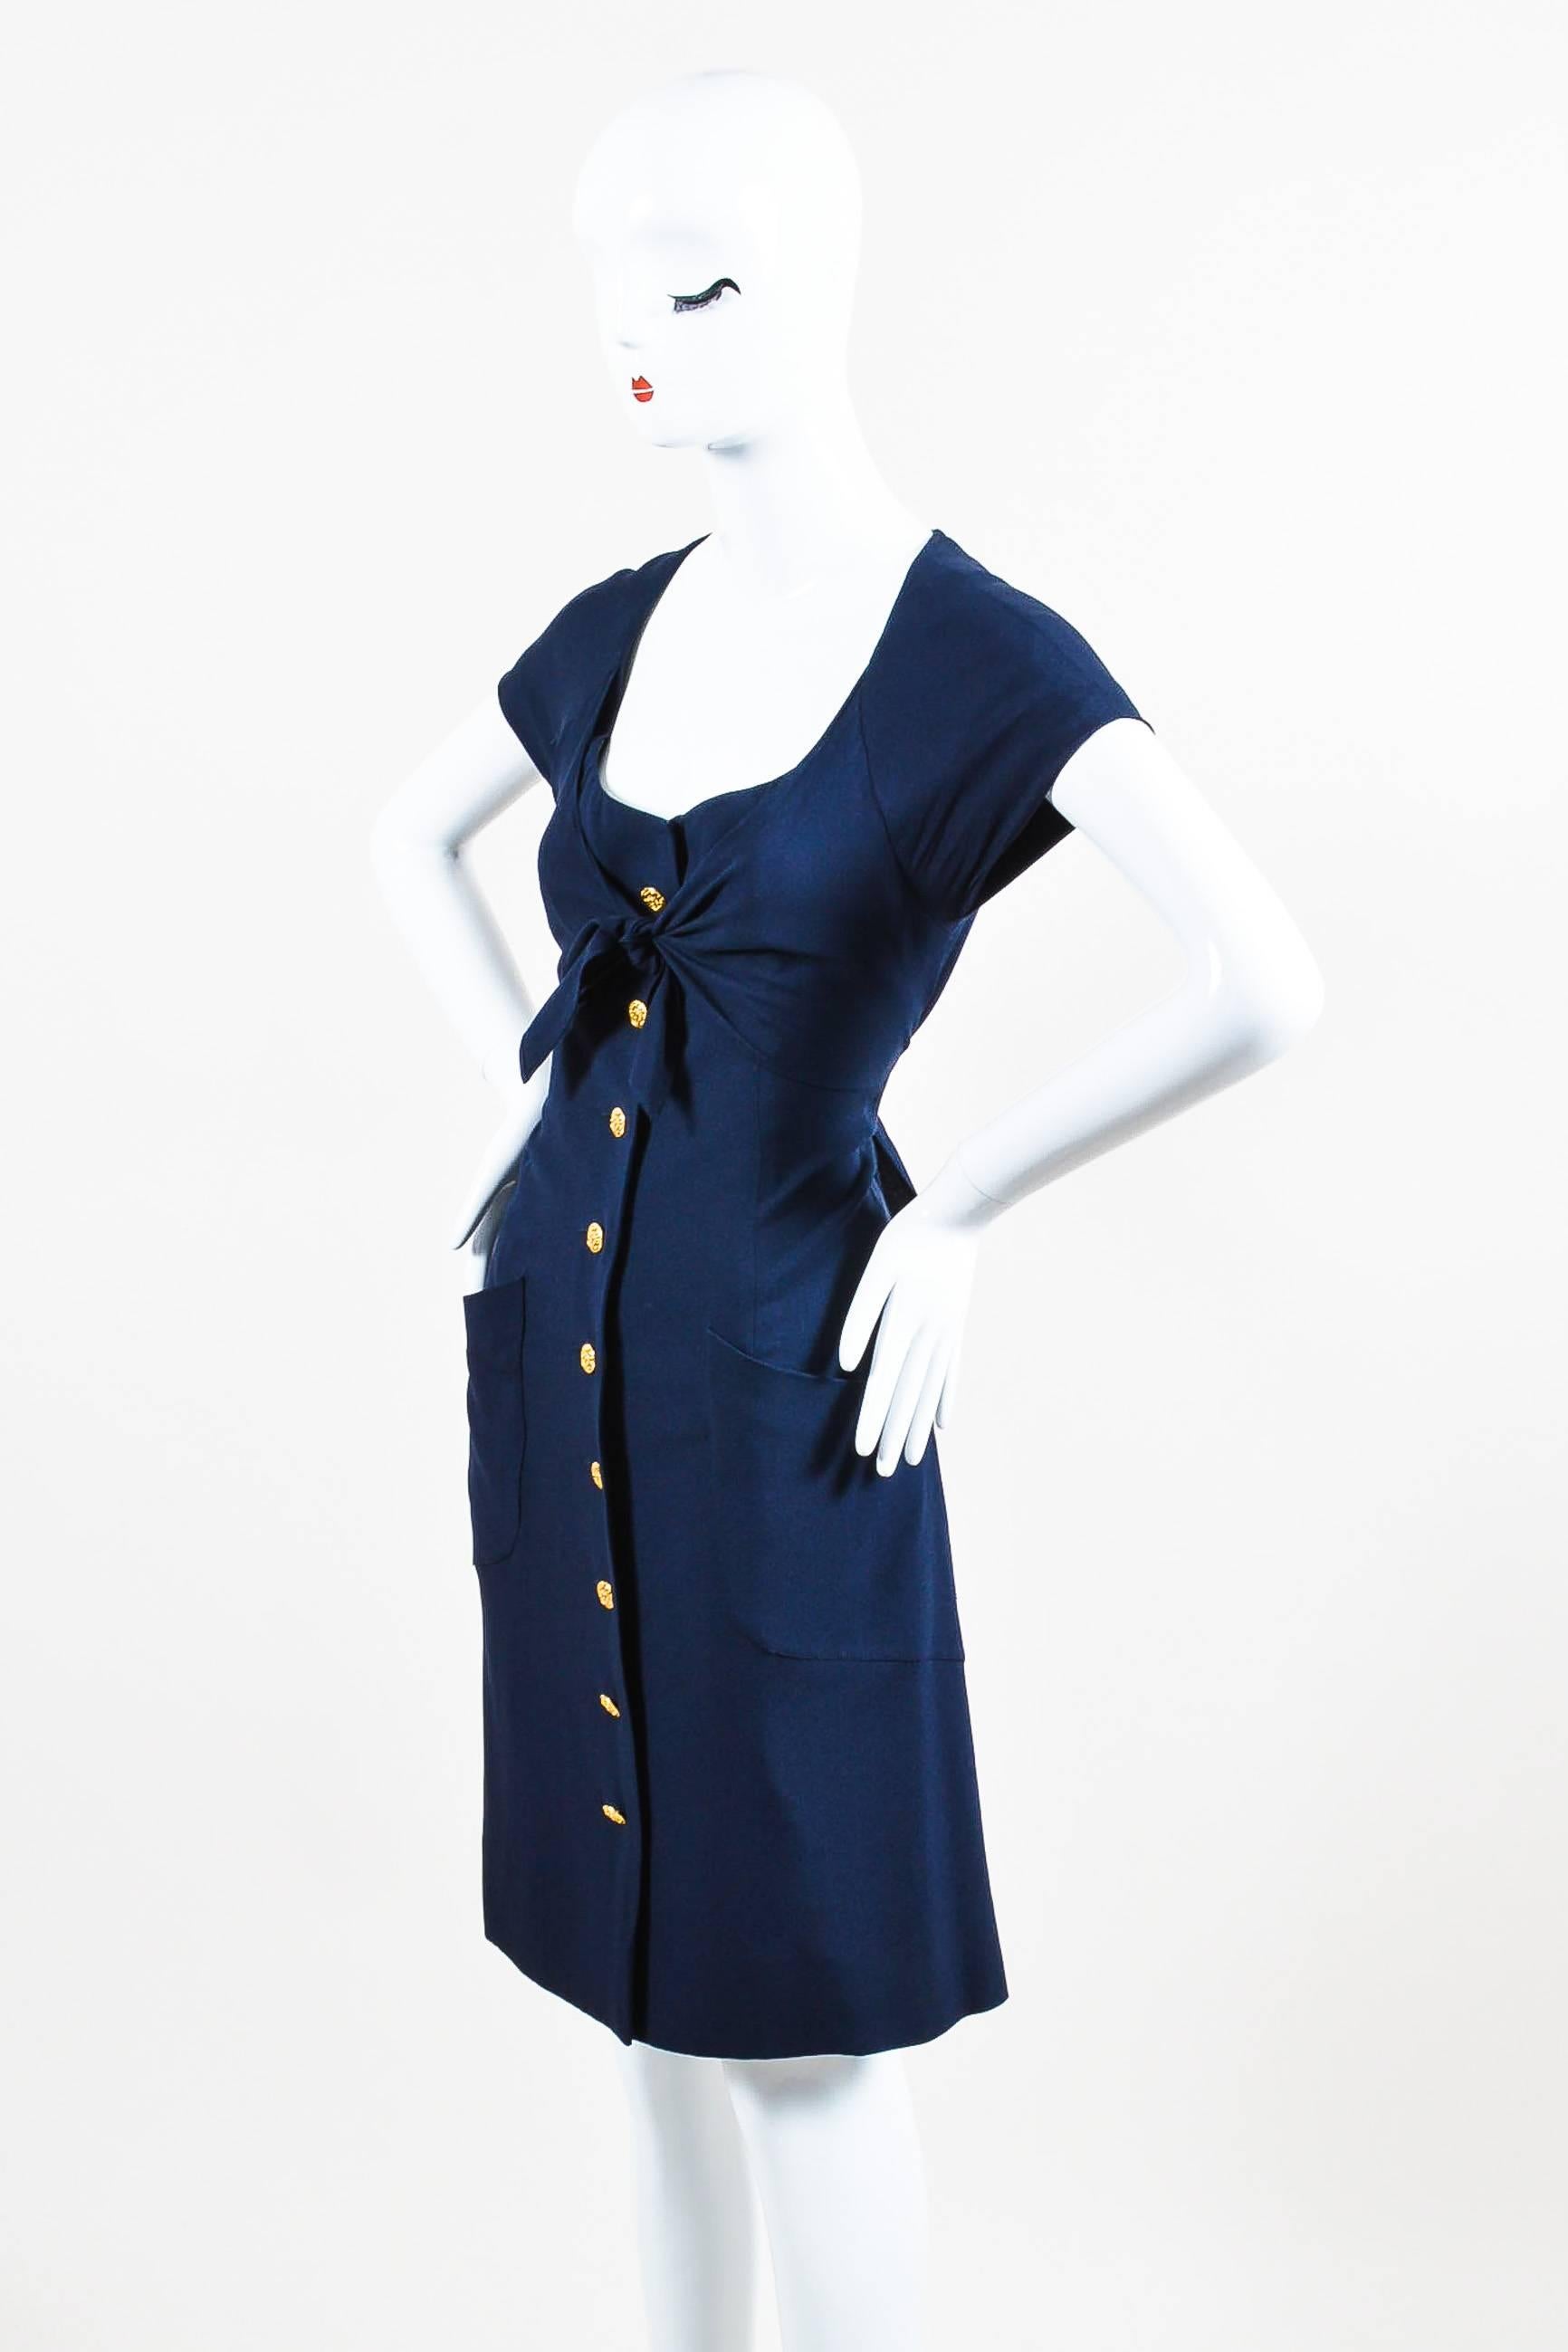 Sailor-chic dress by Chanel in a flowing material. This navy blue and gold-tone piece features a button front closure and ruffled trim at the sides. Scoop neckline with cap sleeves. Two front patch pockets. Shift shape hits approximately at the